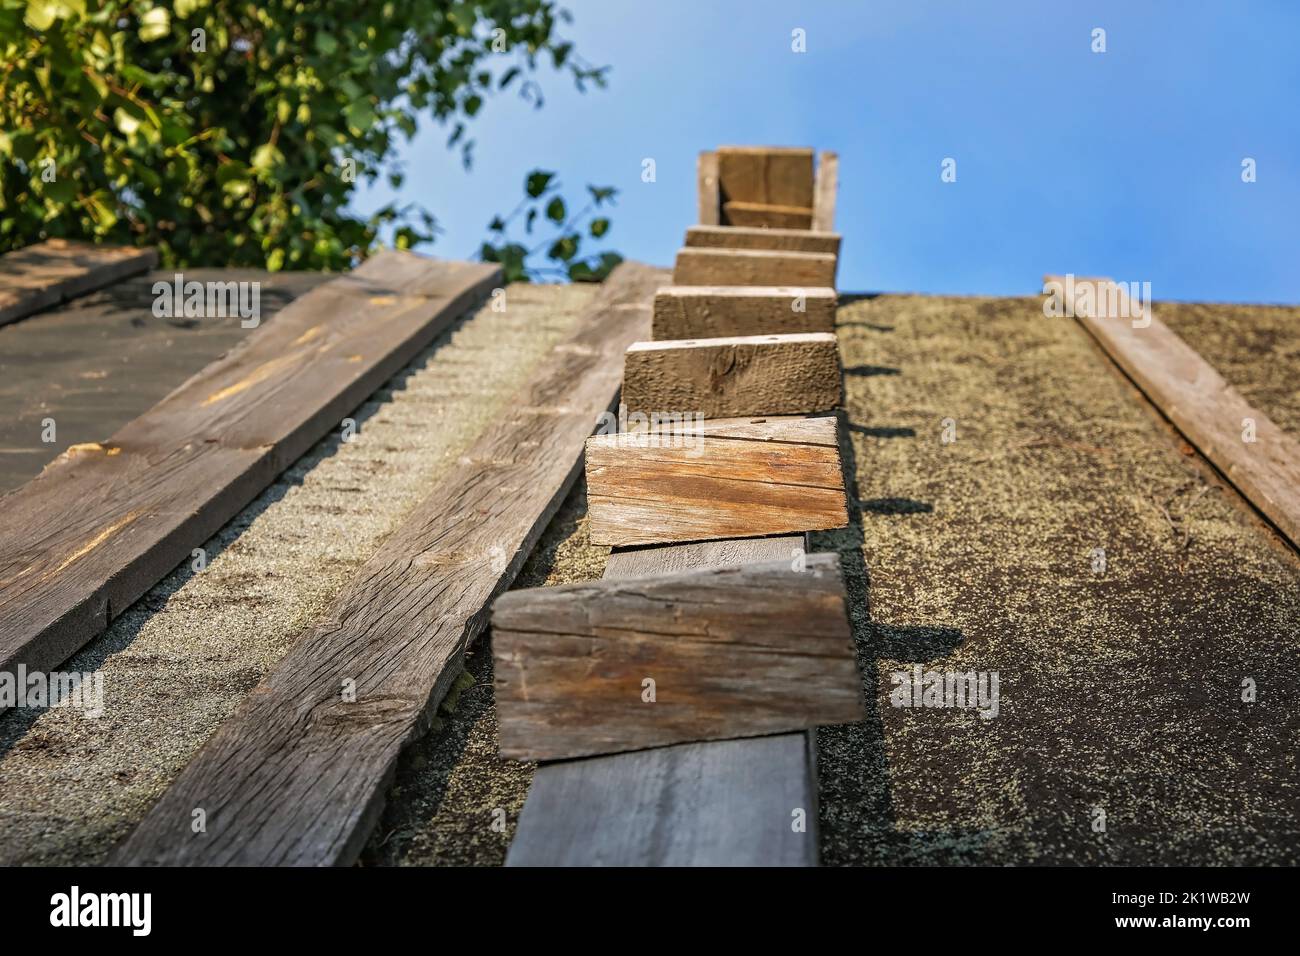 Wooden stairway to the sky. Wooden staircase on the roof of the house. Homemade wooden staircase. Stock Photo